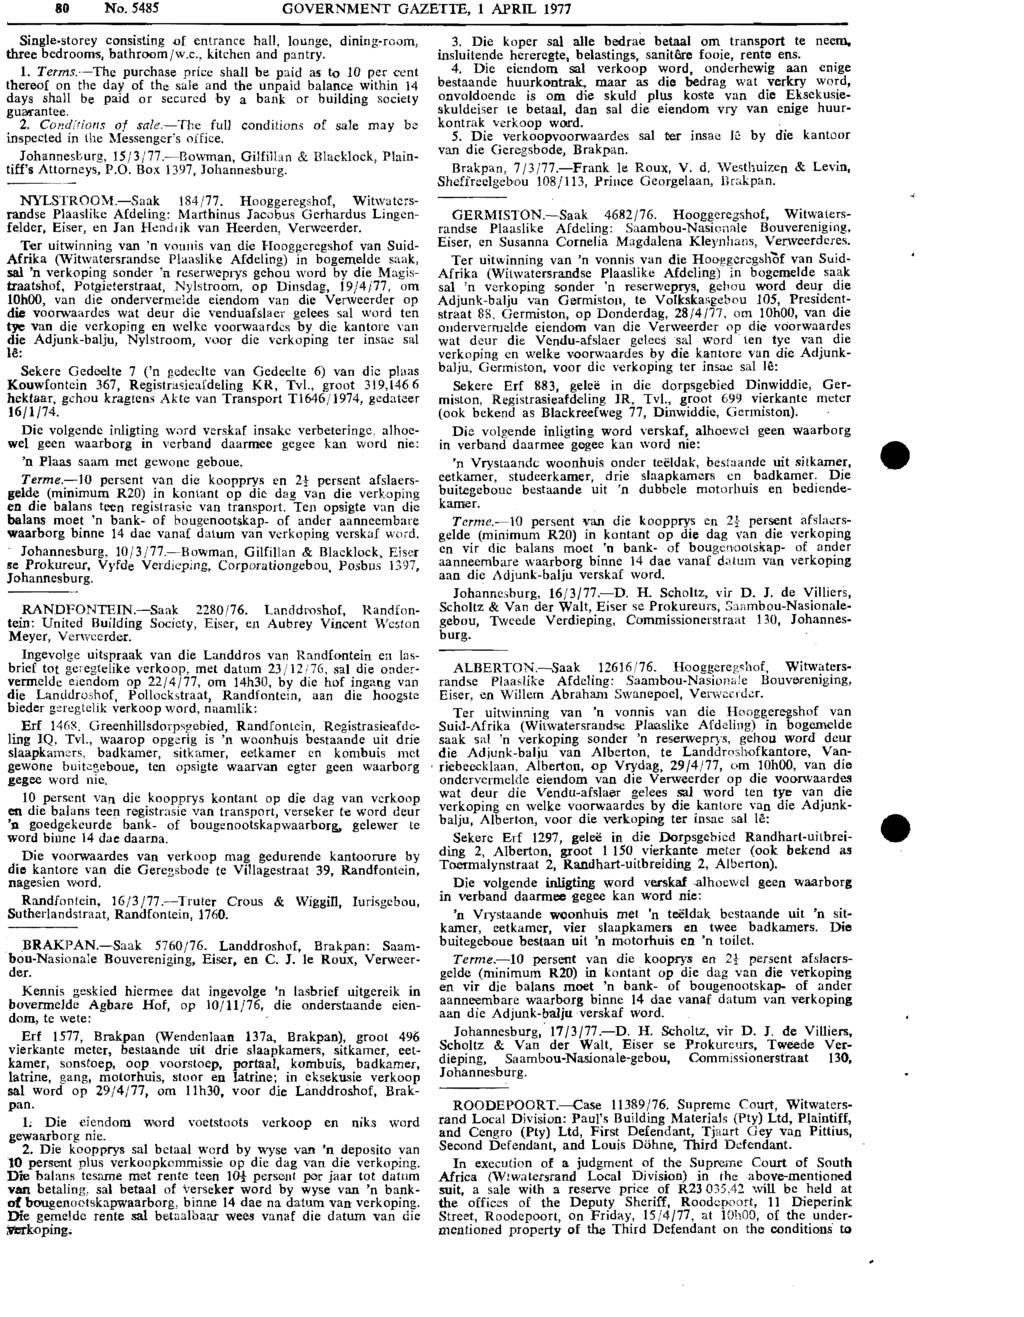 80 No. 5485 GOVERNMENT GAZETTE, 1 APRIL 1971 Single-storey consisting,(if entrance hall, lounge, dining-room, three bedrooms, bathroomiw.c., kitchen and pantry. 1. Terms.